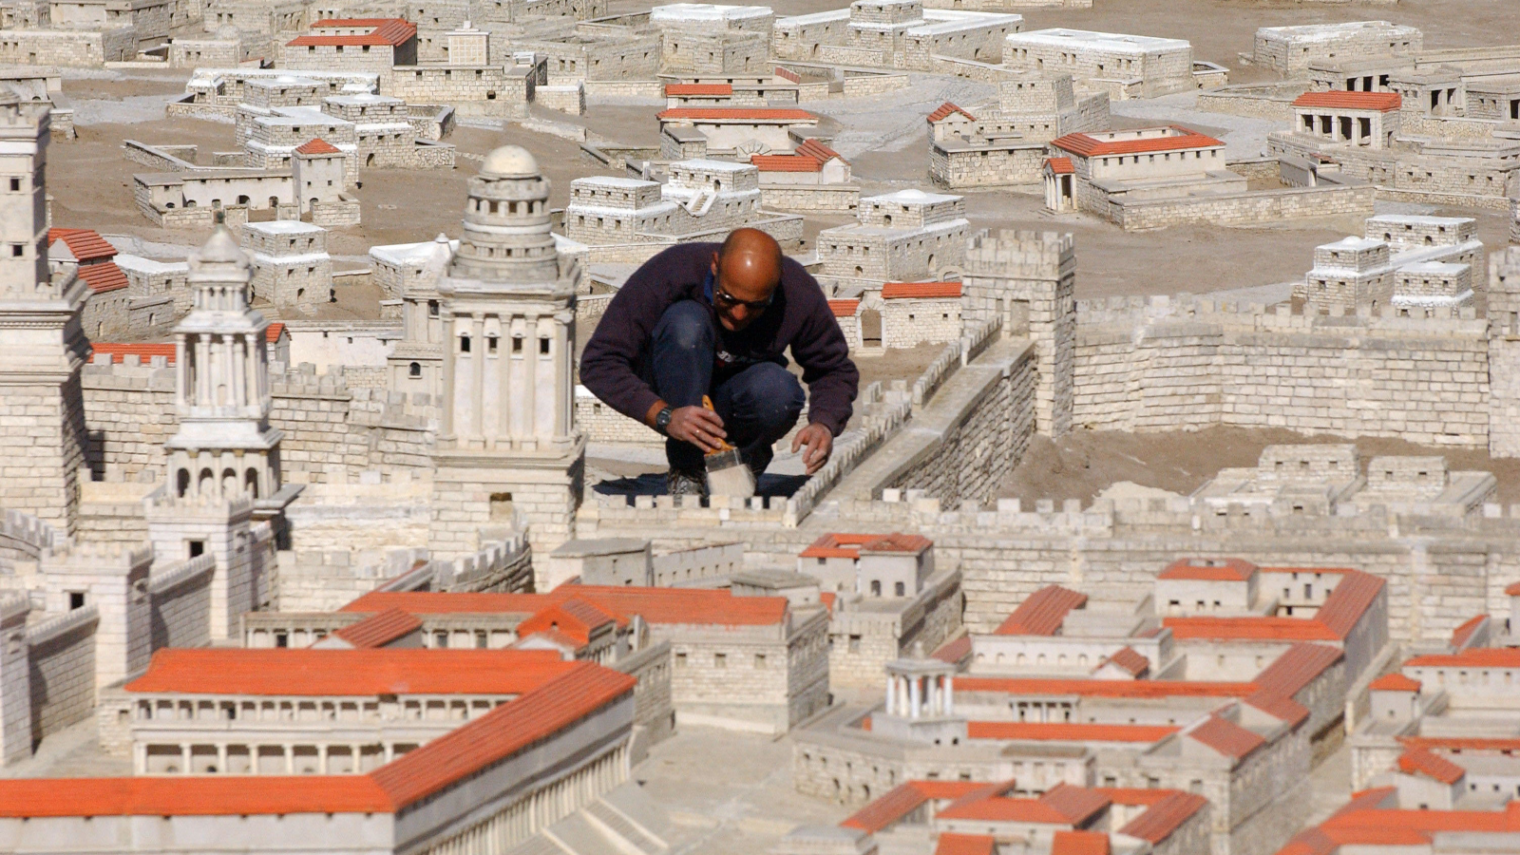 Painting the model of Jerusalem at the time of the Second Temple that was moved from the Holyland Hotel to the Israel Museum in 2009. Photo by Yossi Zamir/Flash90